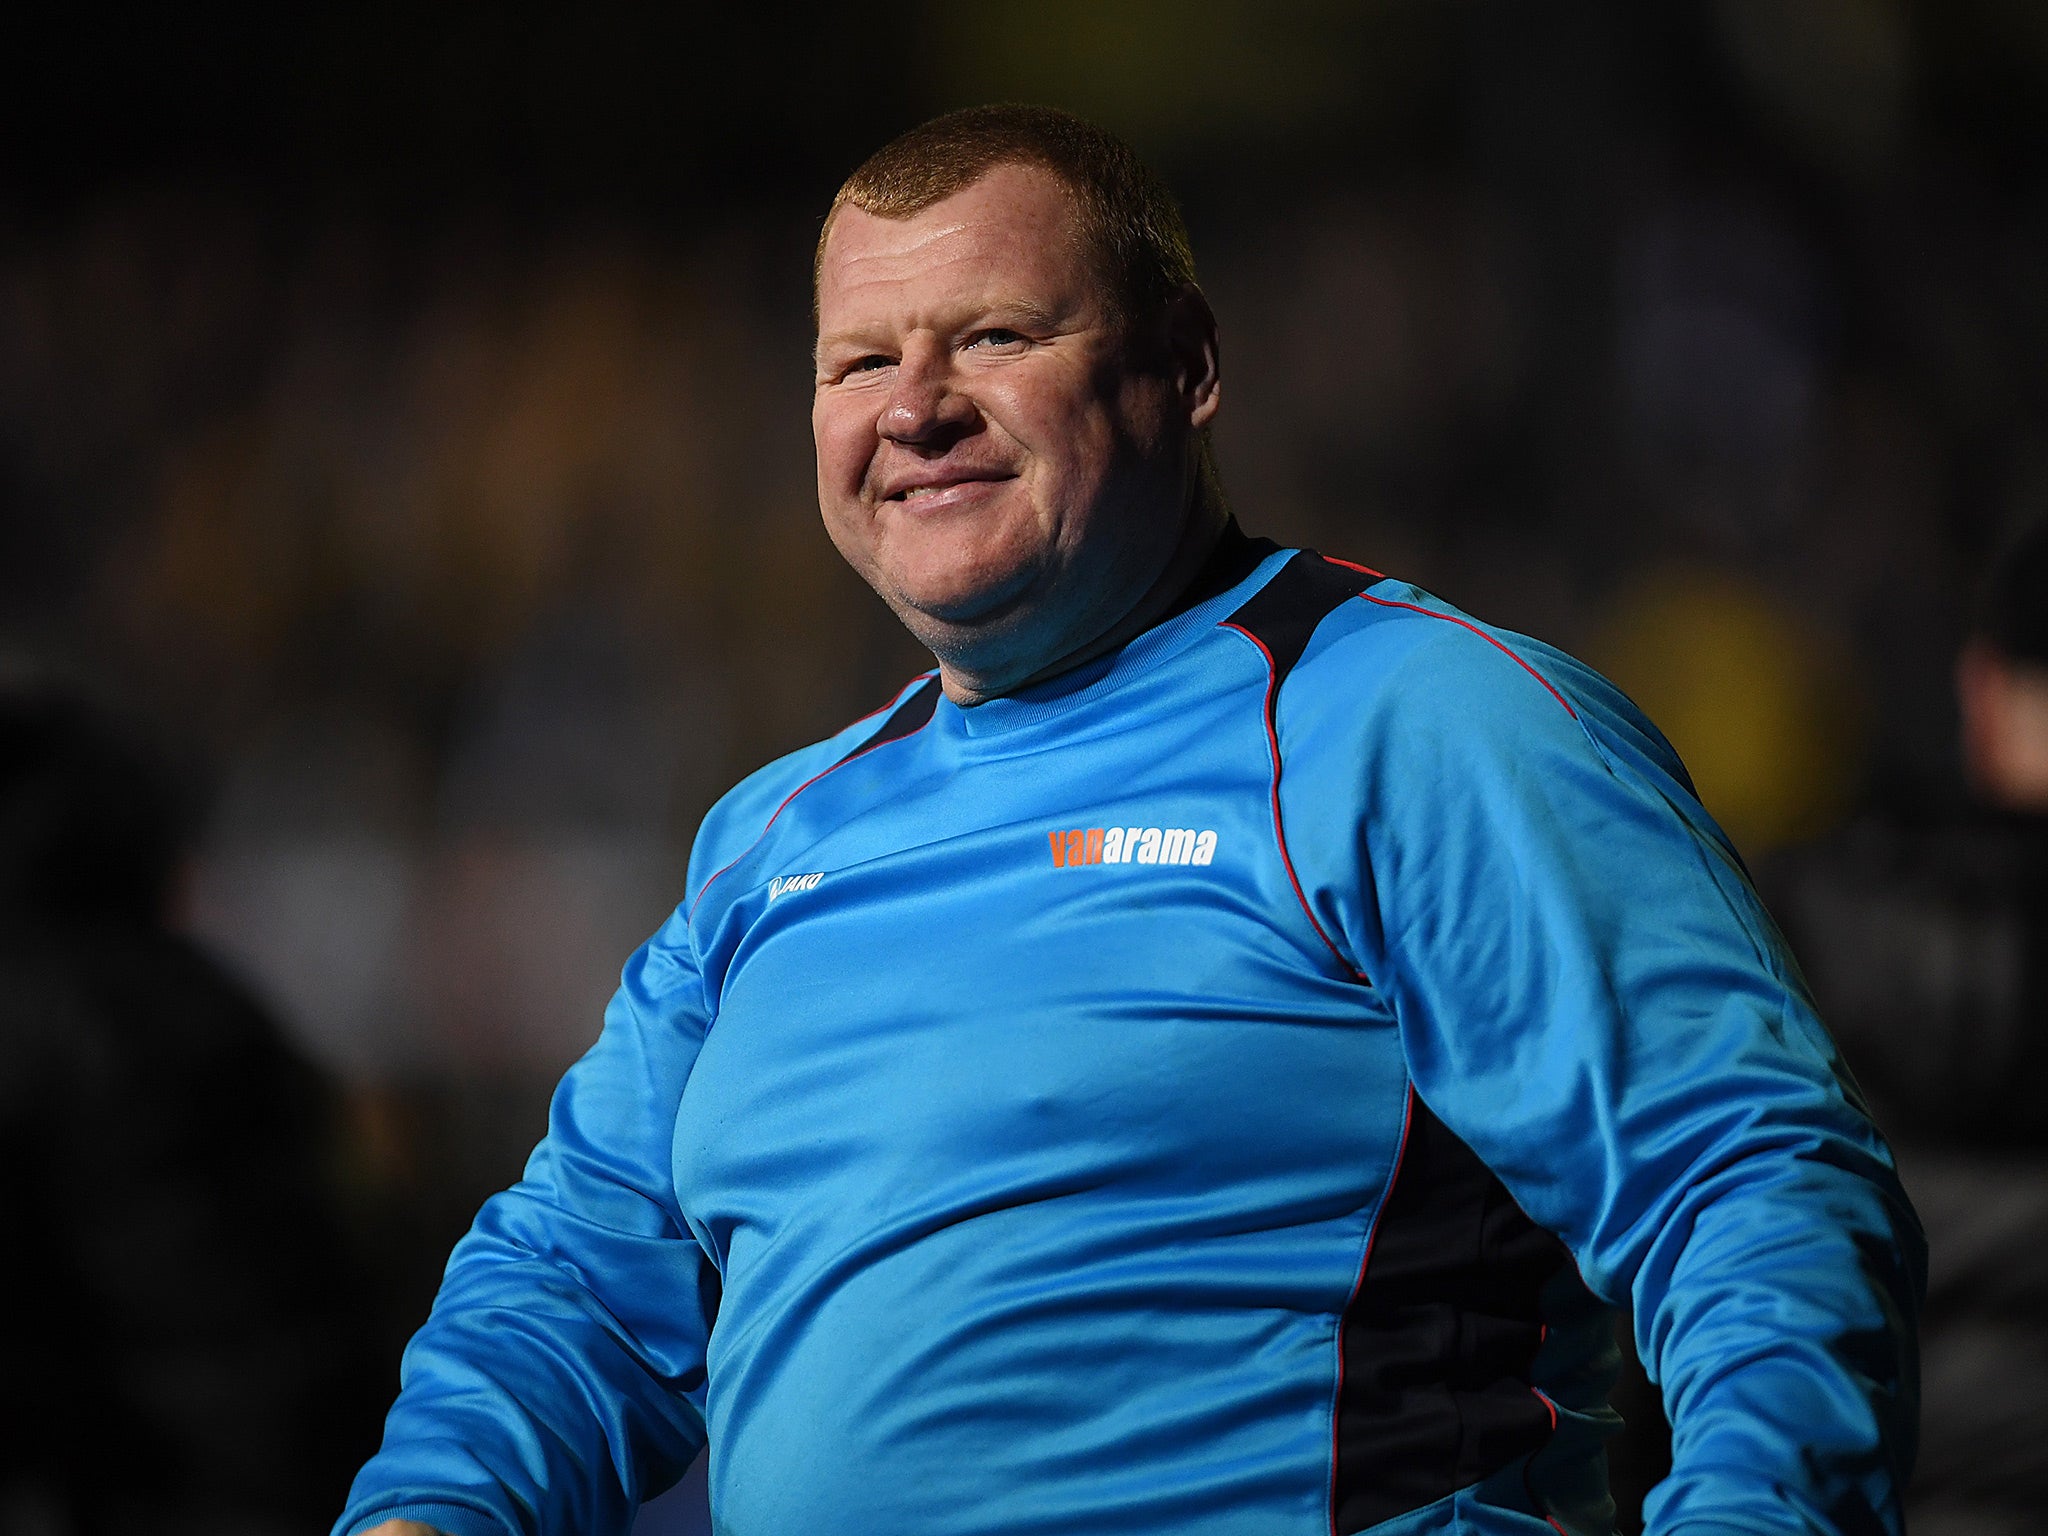 The profile of Wayne Shaw, who left the club on Tuesday, was altered